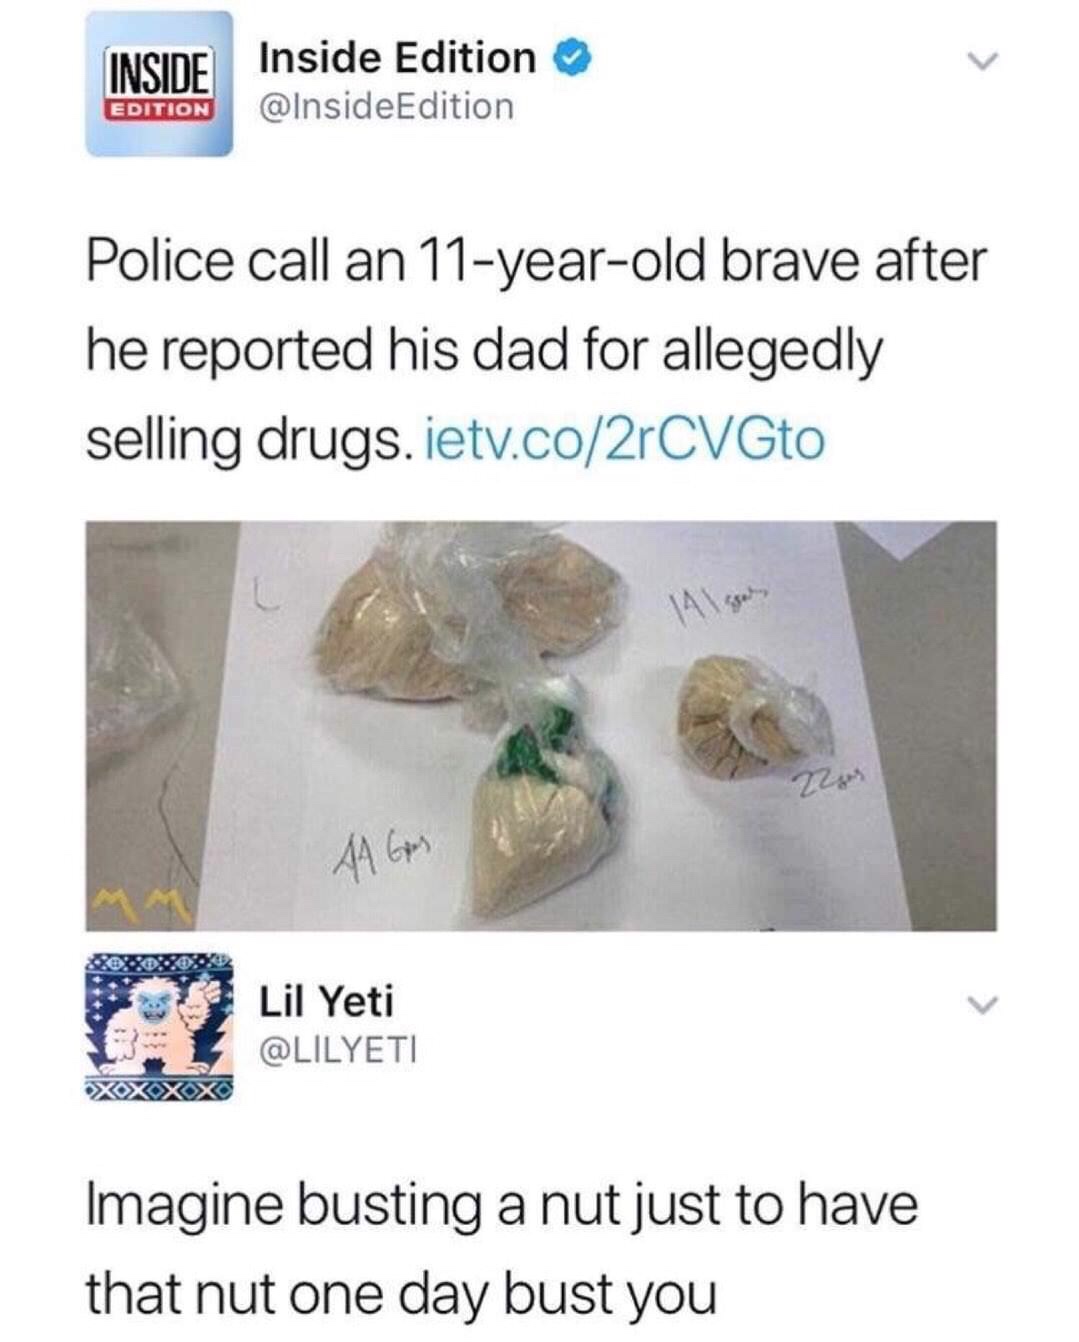 imagine busting a nut just to have - Inside Inside Edition Edition Edition Police call an 11yearold brave after he reported his dad for allegedly selling drugs. ietv.co2rCVGto Tees 44 G 2 Li Yerli Lil Yeti Xoxox Imagine busting a nut just to have that nut